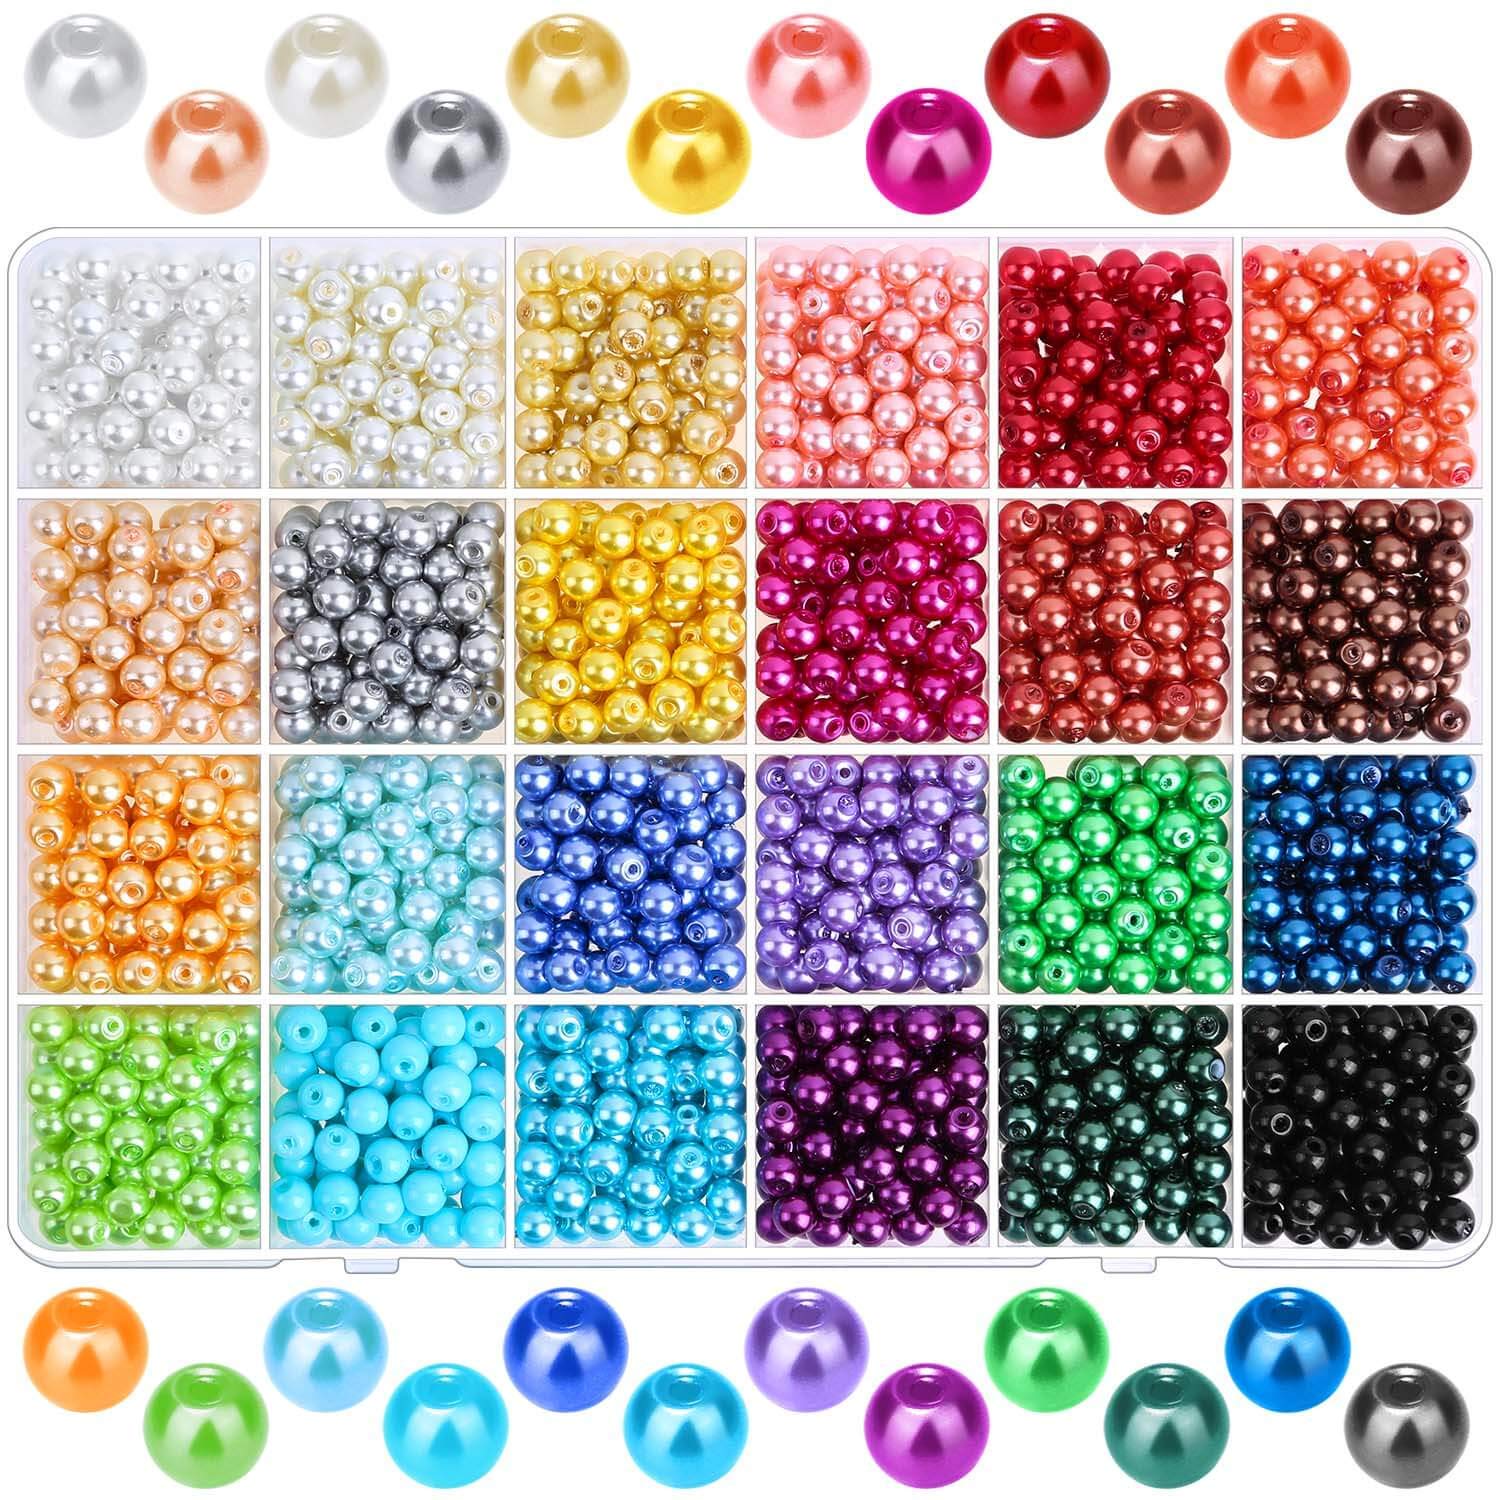 Glass Tila Beads Multicolor Square Beads Pearl Jewelry Making Bracelets  5grams